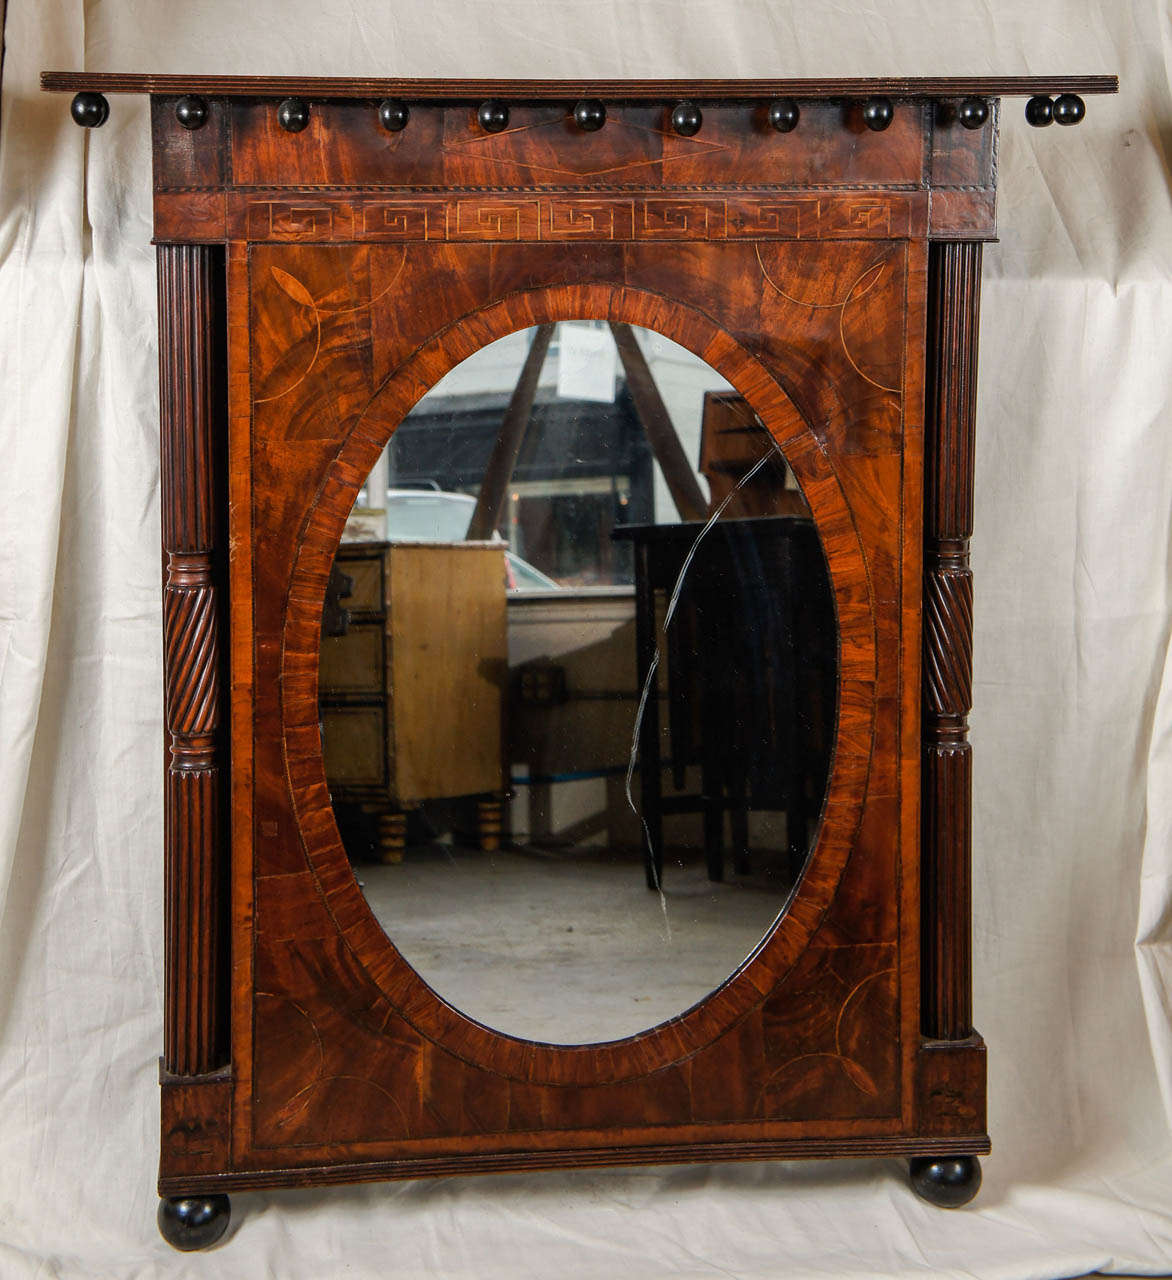 A beautiful example of an American late Federal mirror
inlaid with multiple woods. An 